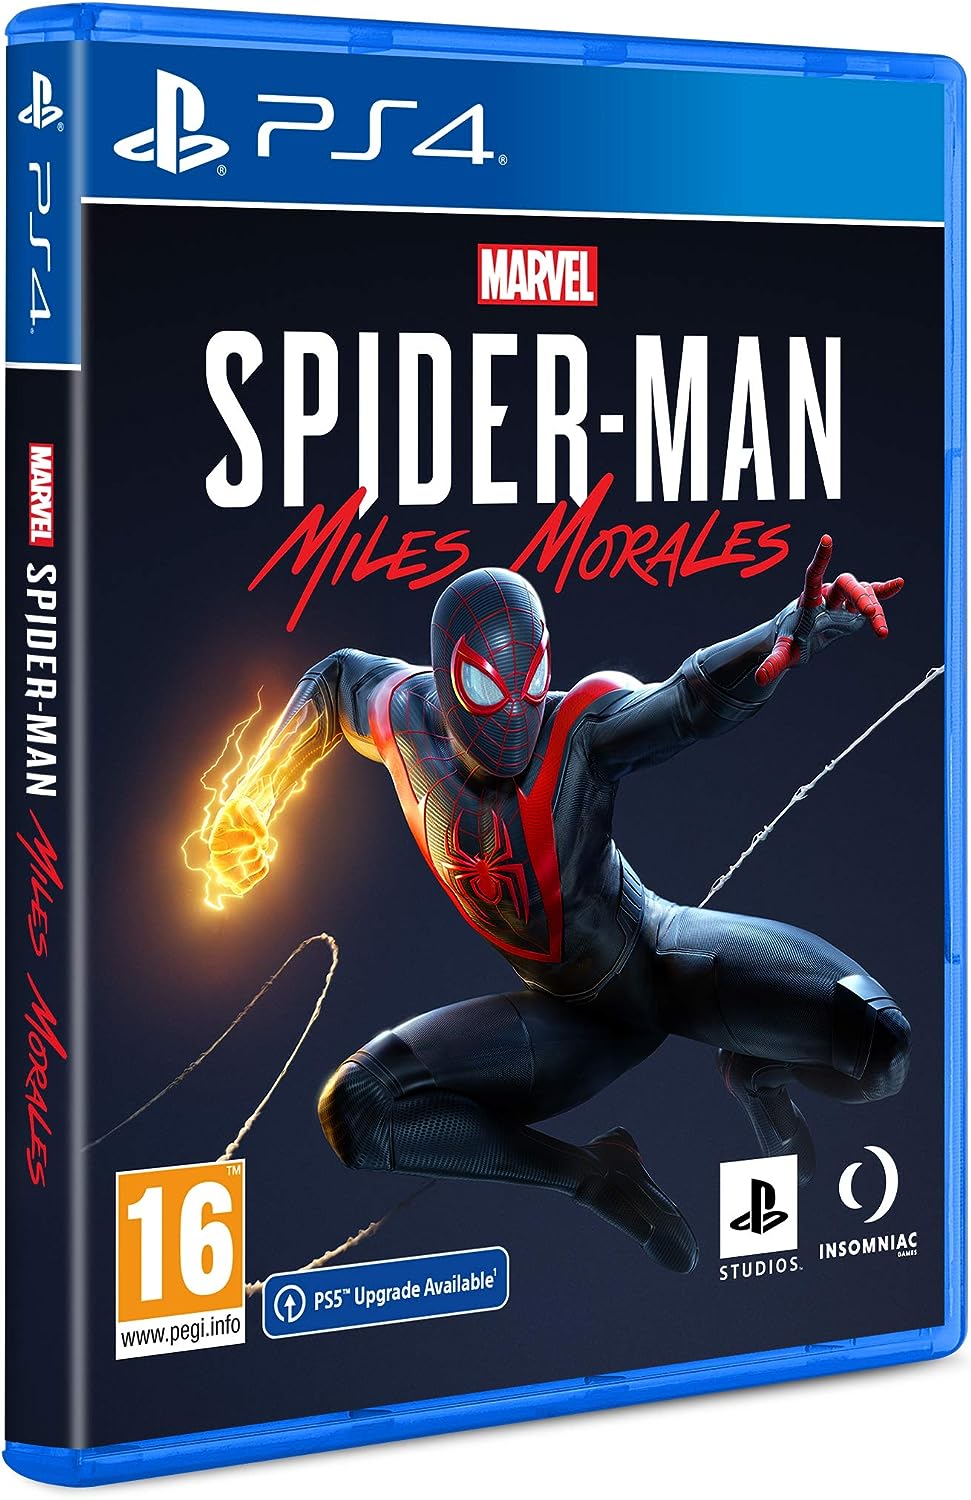 Spider-Man Miles Morales - PS4/PS5 Upgradeable